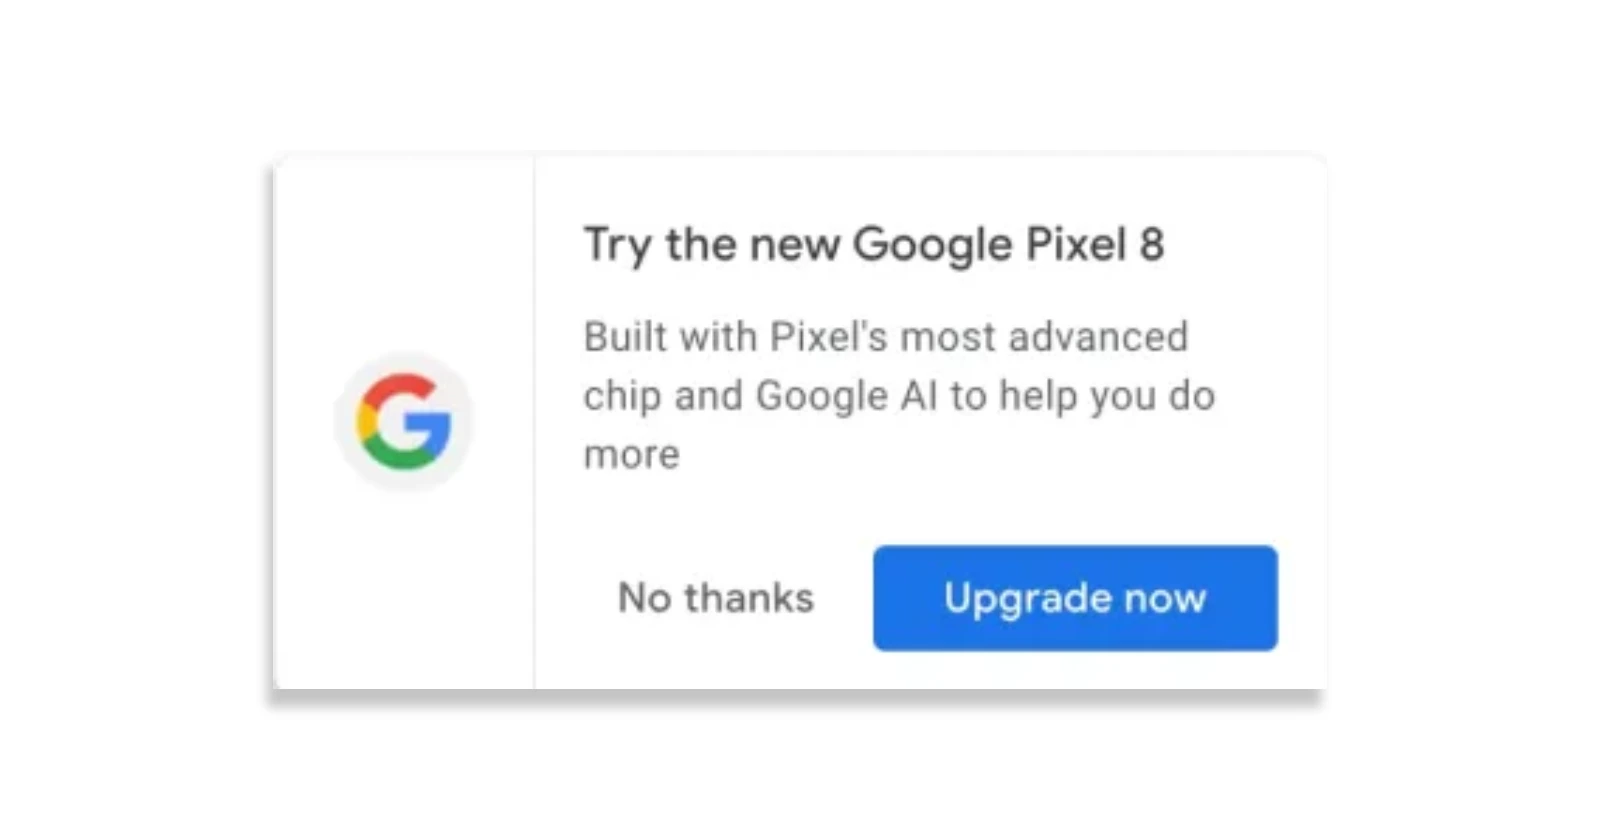 Google using Search to promote the Pixel 8